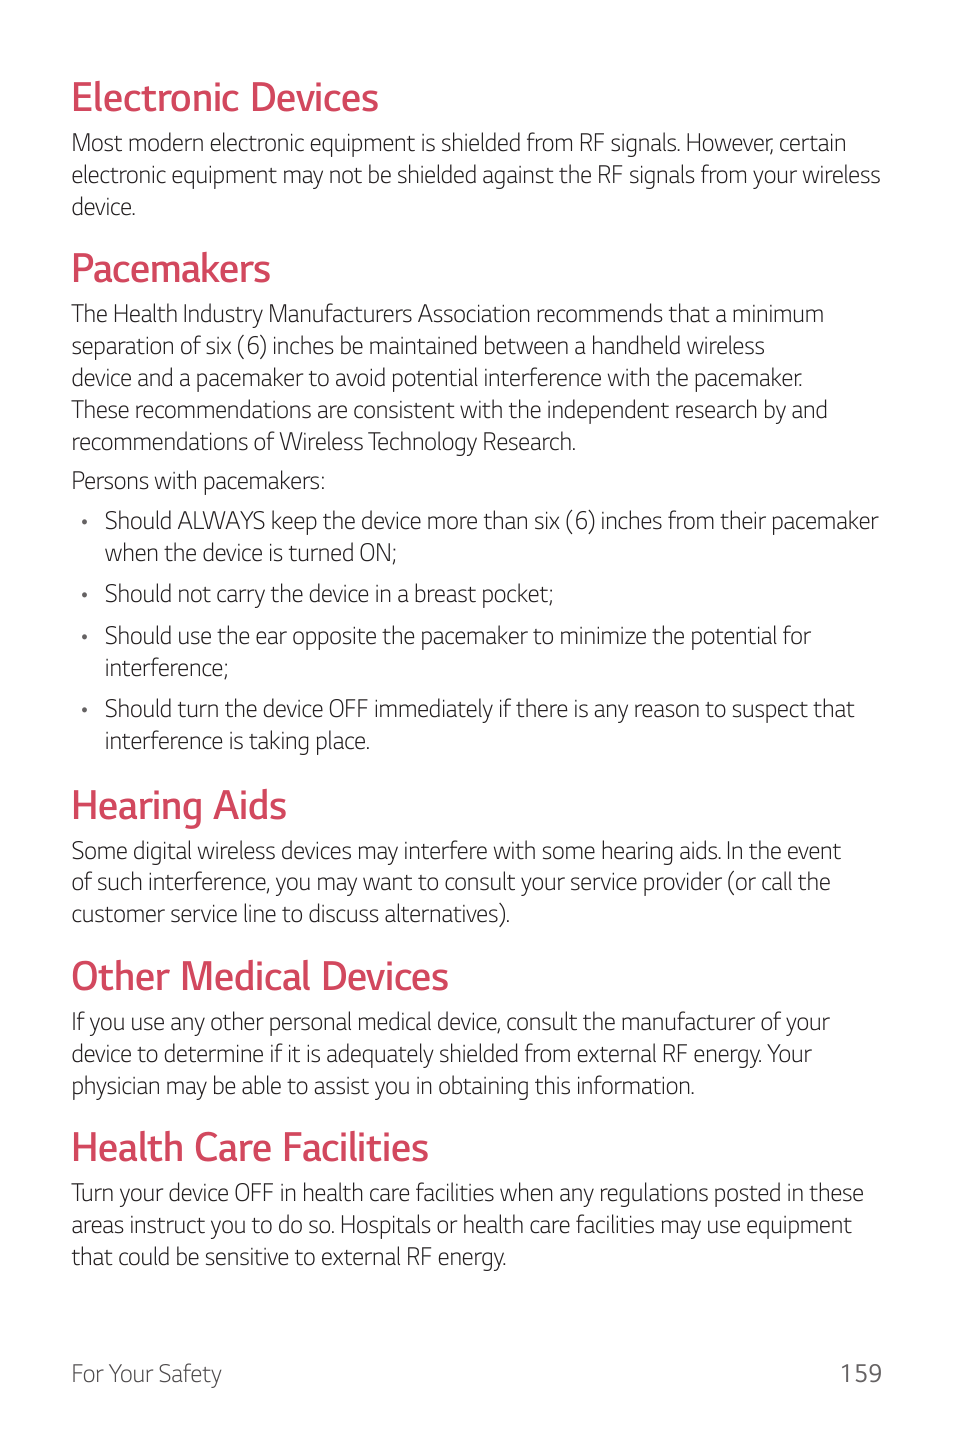 Electronic devices, Pacemakers, Hearing aids | Other medical devices, Health care facilities | LG G6 H872 User Manual | Page 160 / 183